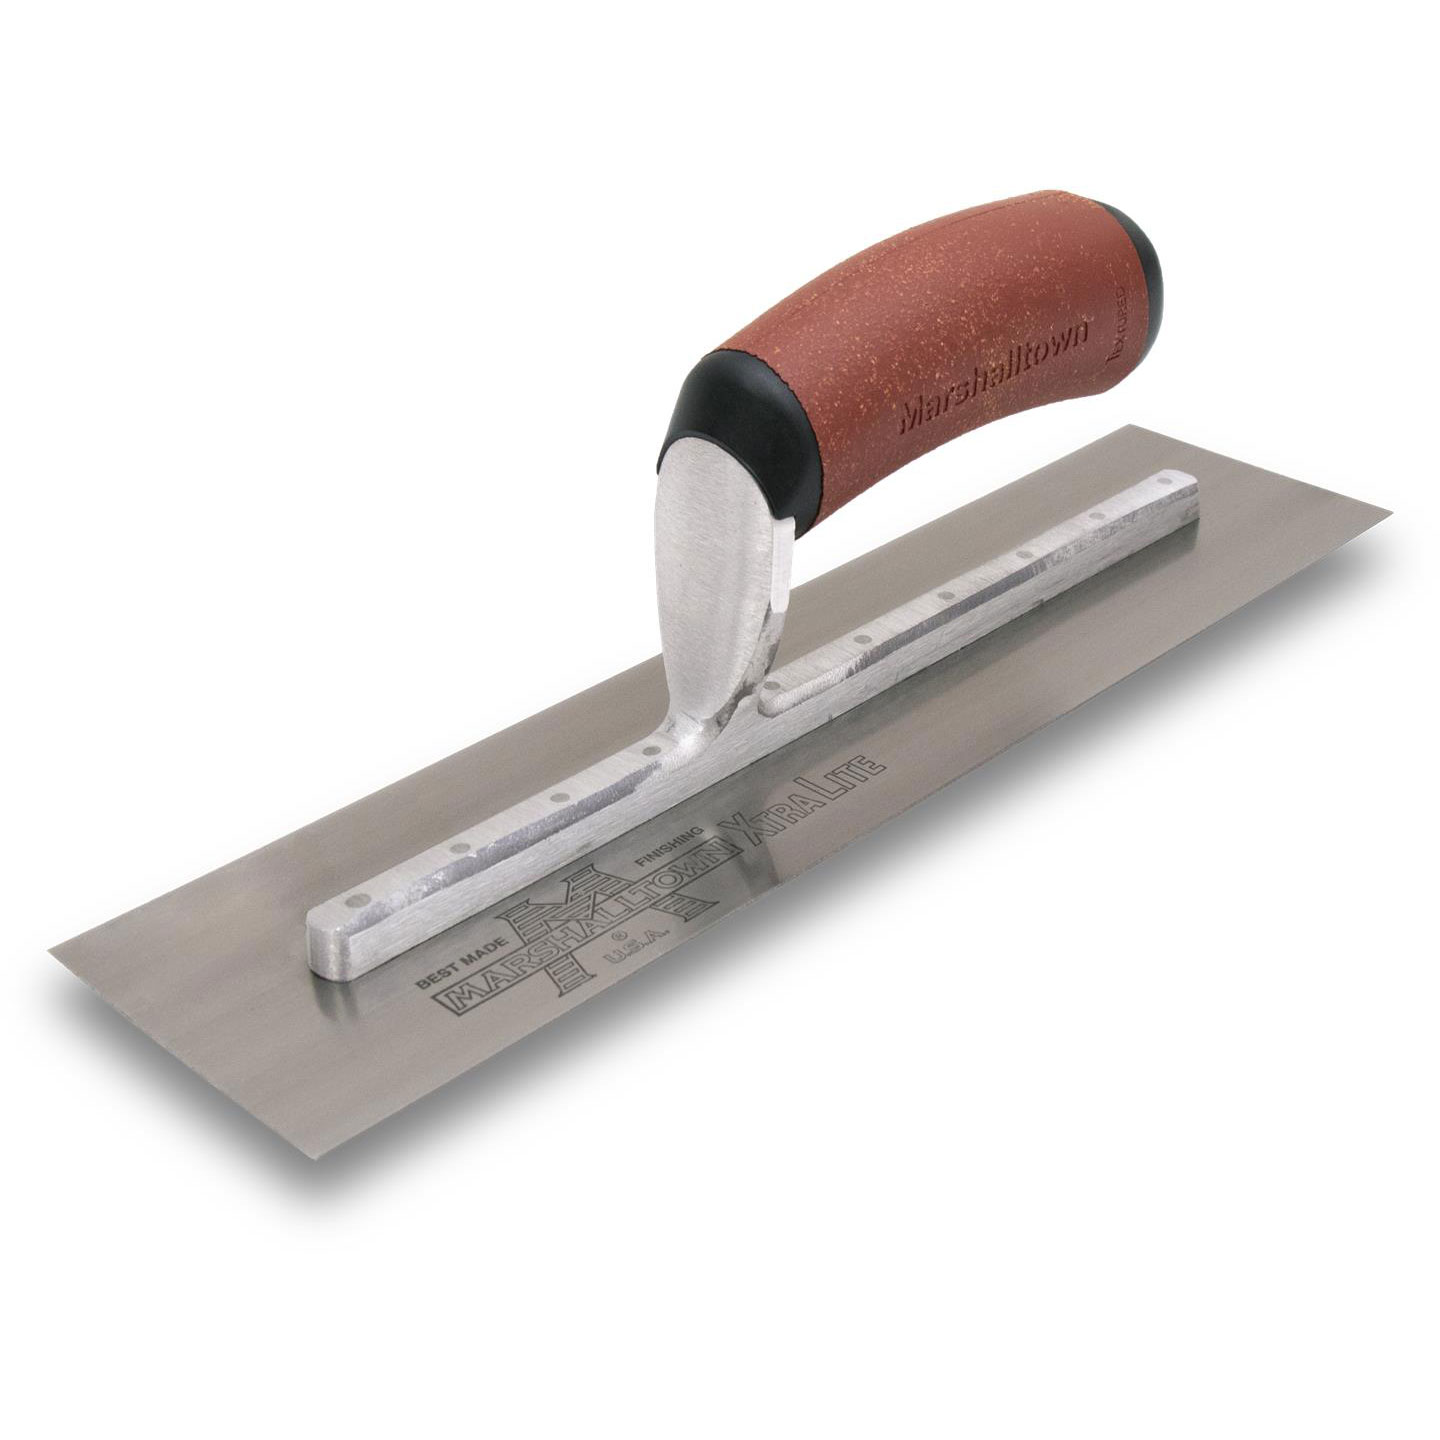 Marshalltown MXS64DC 14in x 4in Finishing Trowel with DuraCork Handle MXS64DC